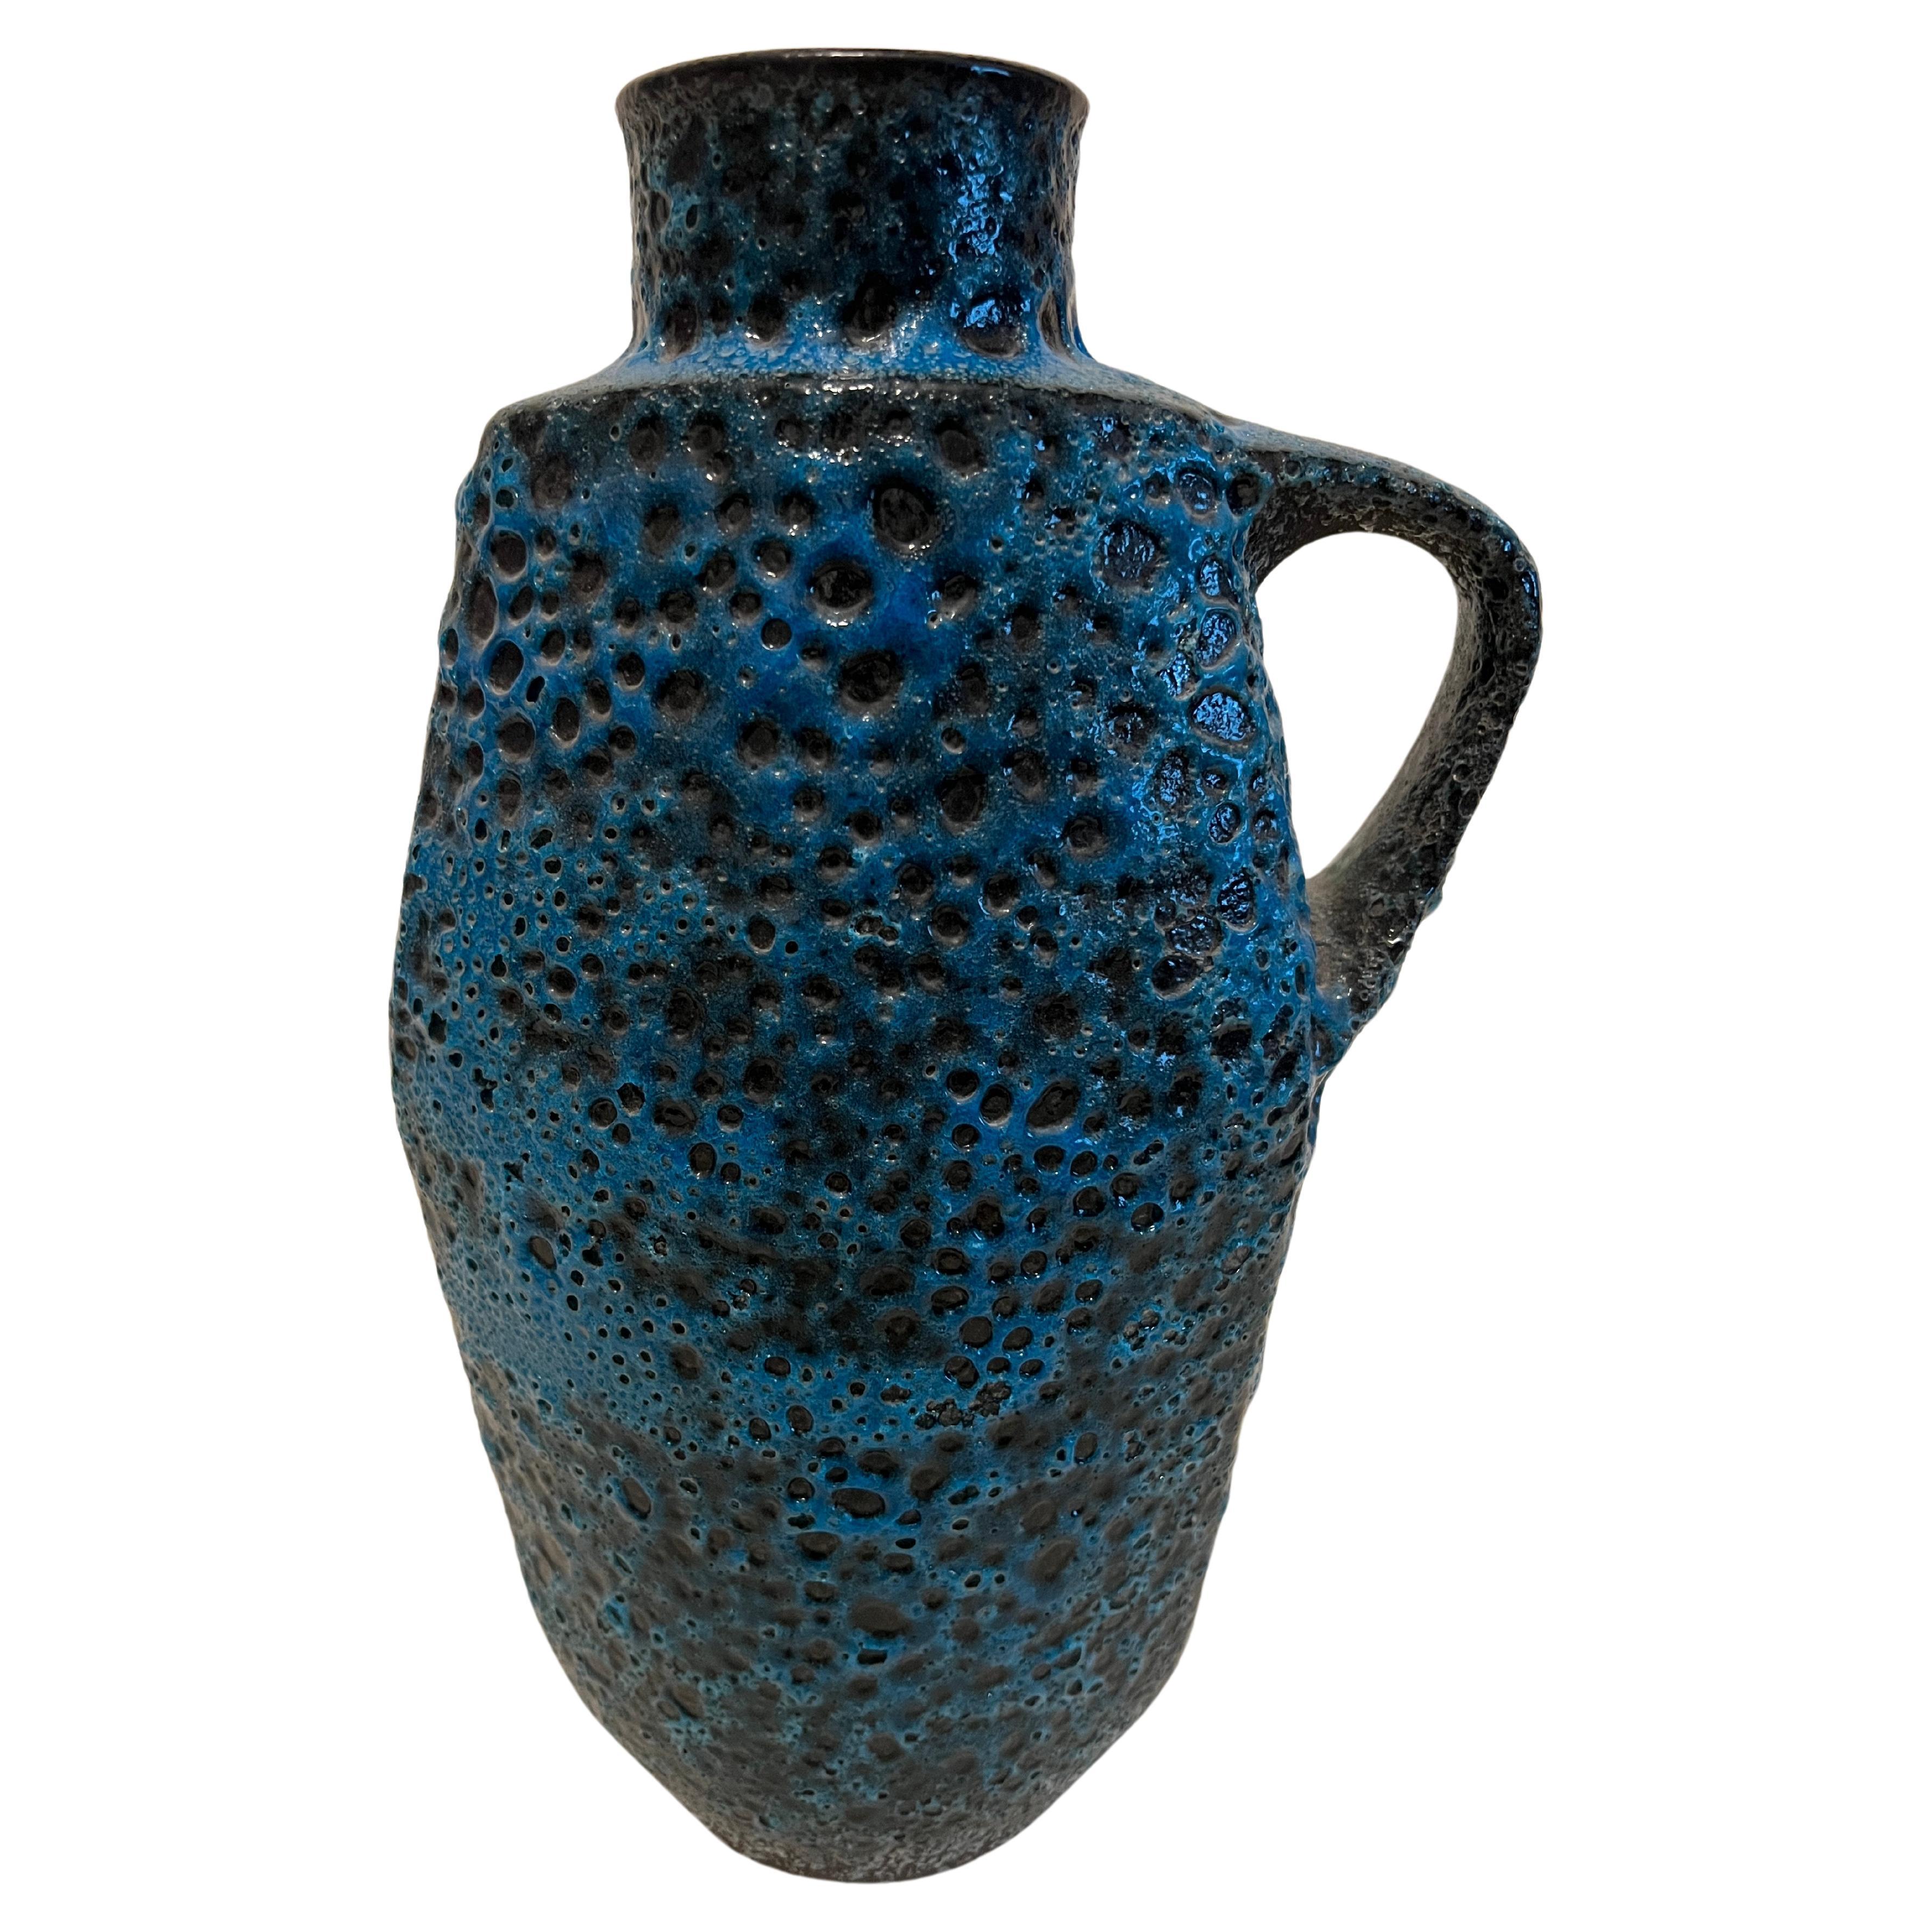 Black and Blue German Fat Lava Pitcher, 1960s